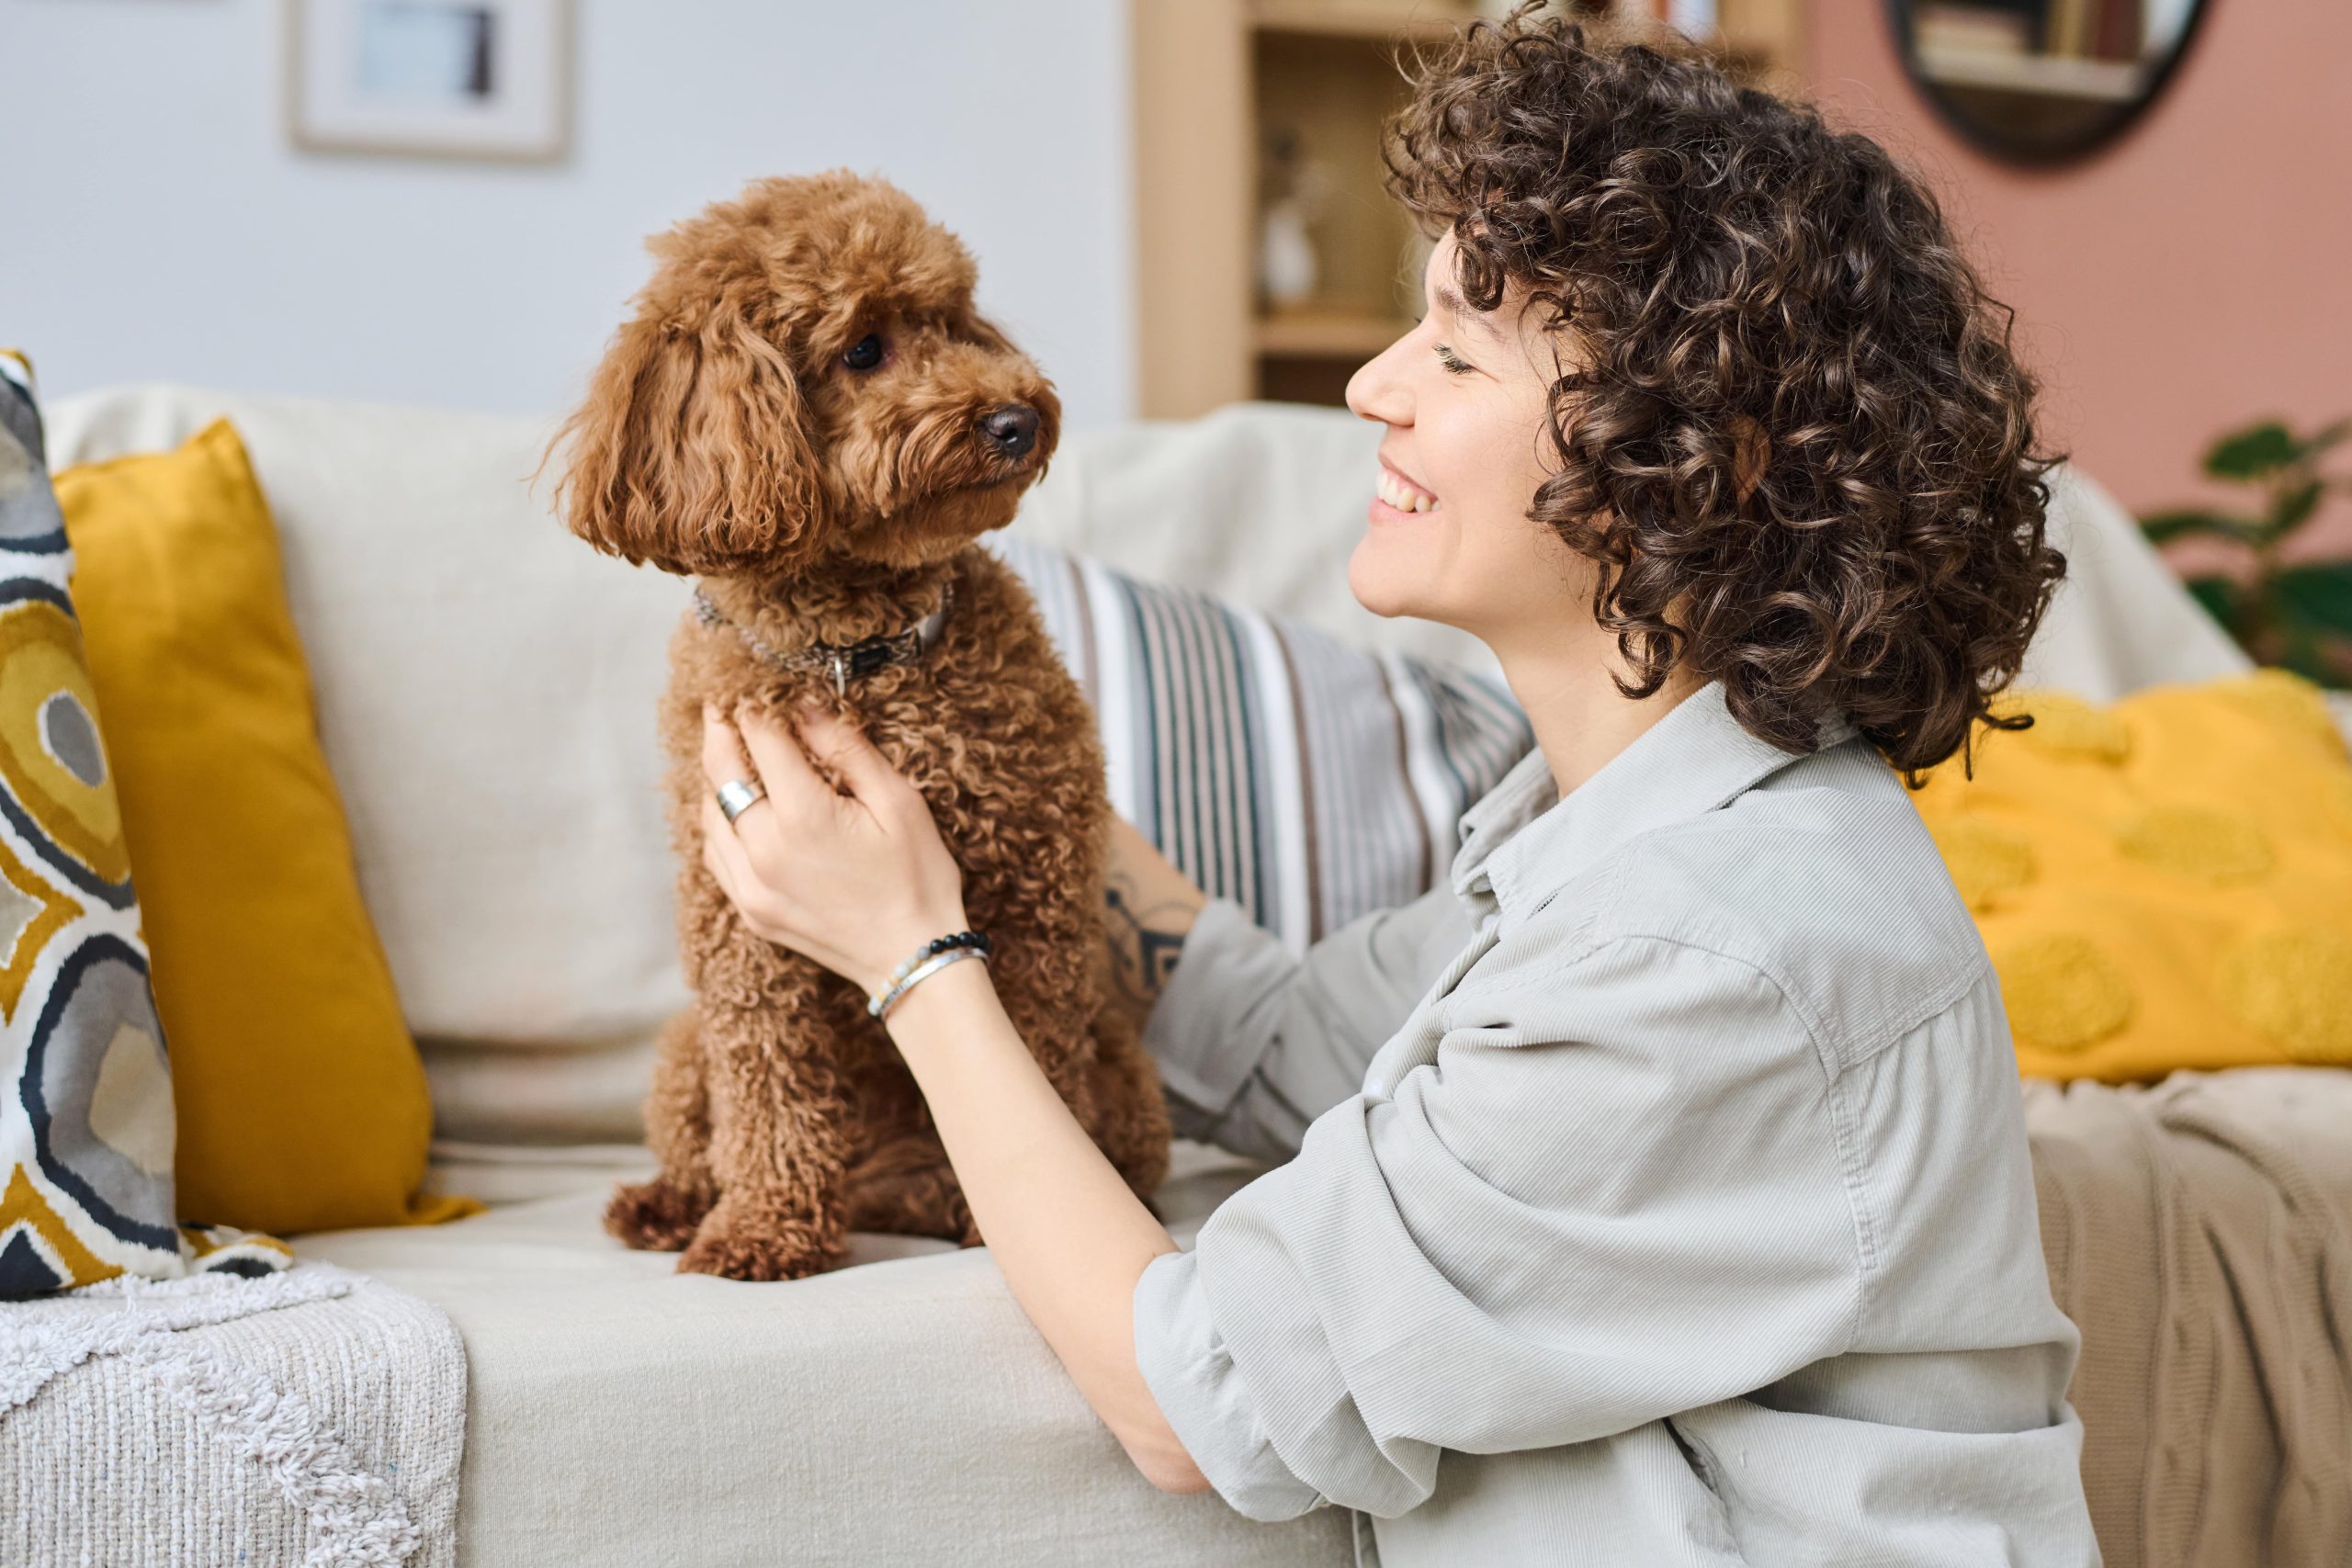 How To Find the Pawfect Pet Sitter: 5 Expert Tips